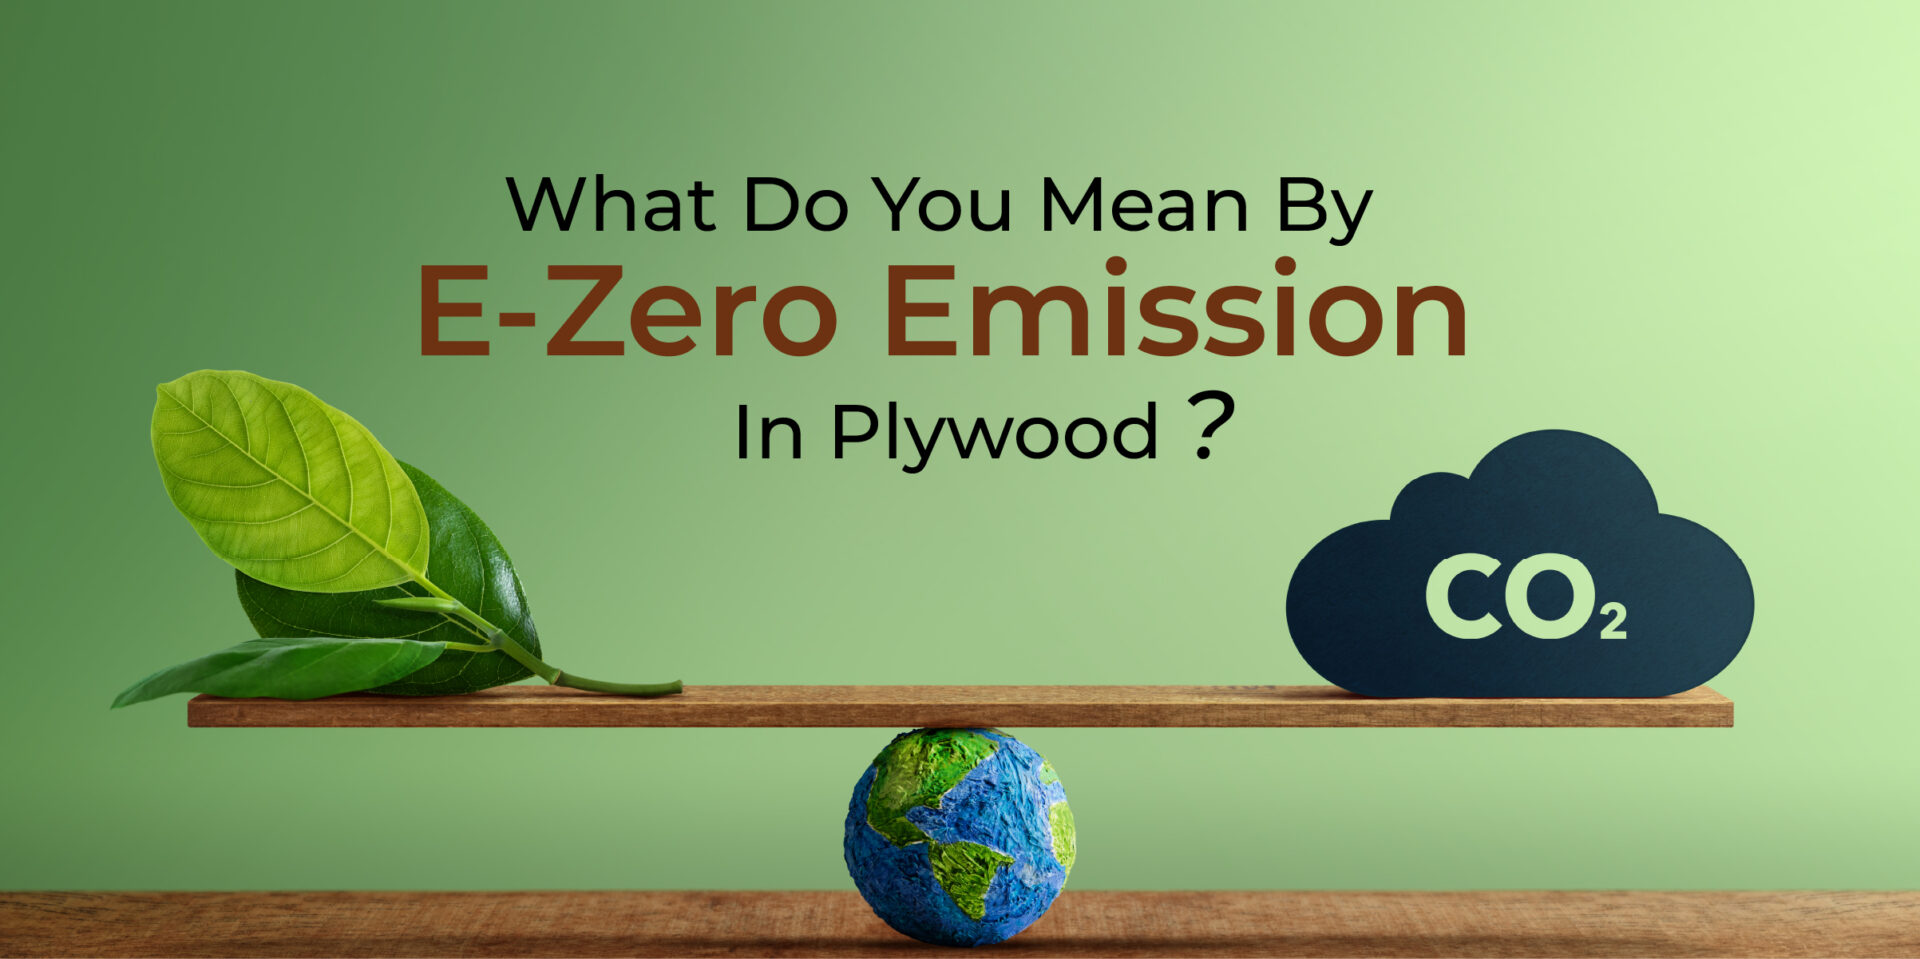 What Do you Mean by E-Zero Emission in Plywood?